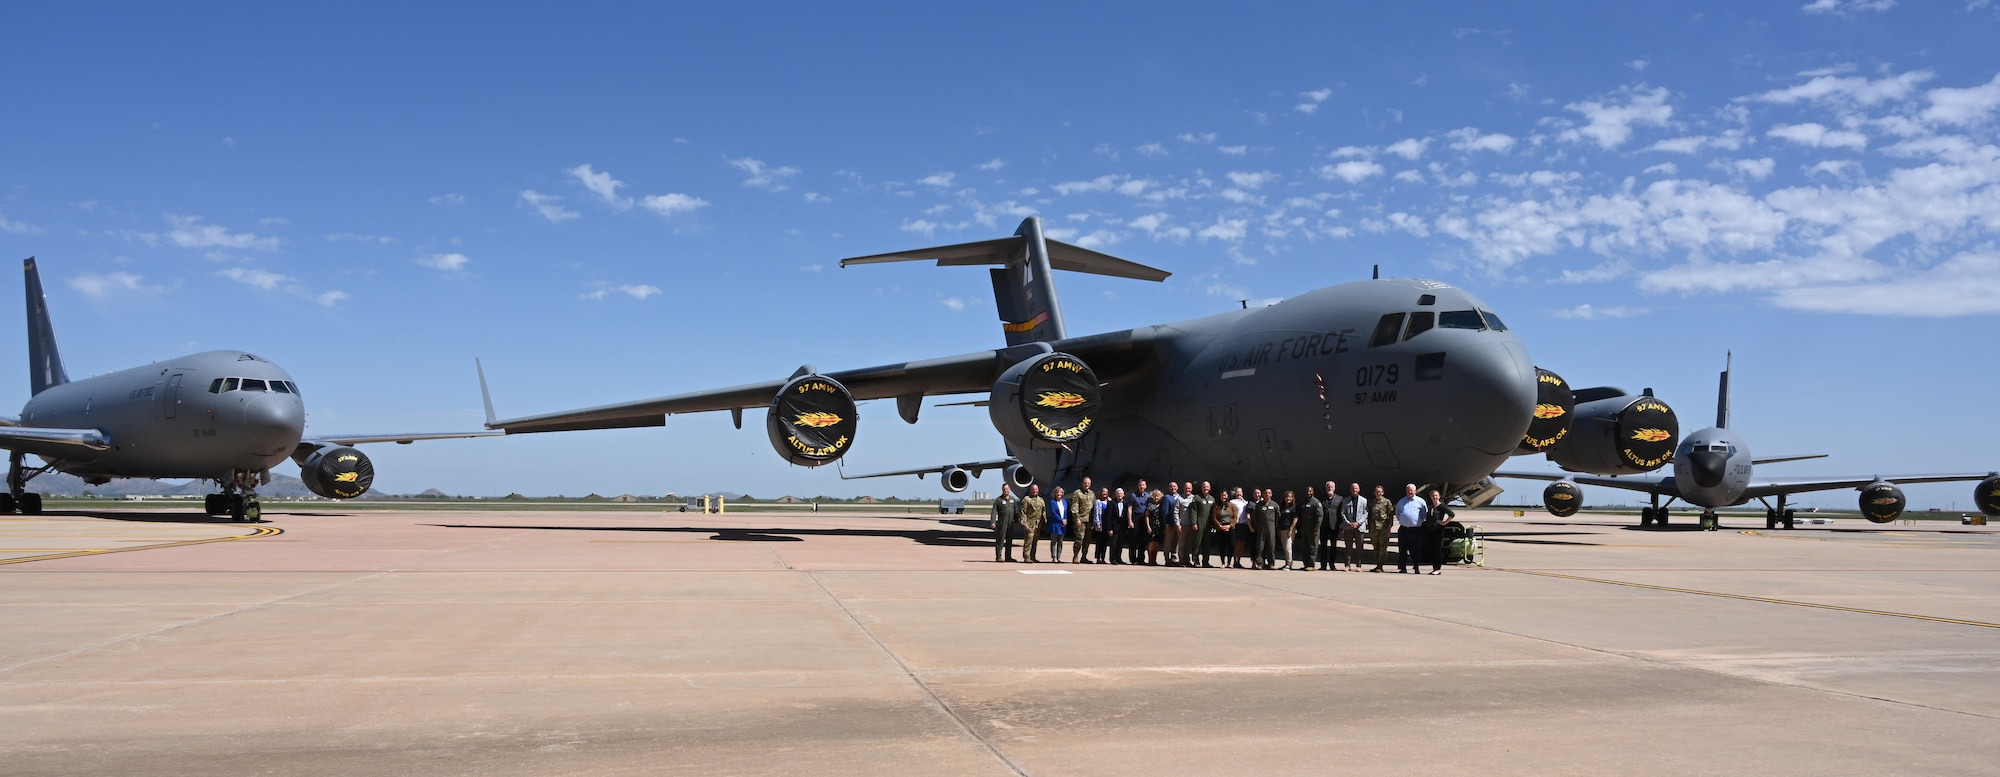 97th Air Mobility Wing (AMW) homecomers, distinguished visitors, and current wing leadership pose for a photo in front of a KC-46 Pegasus, KC-135 Stratotanker, and C-17 Globemaster III at Altus Air Force Base, Oklahoma, April 14, 2023. The 97th AMW trains 70% of the United States mobility Air Force on these three platforms. (U.S. Air Force photo by Airman 1st Class Miyah Gray